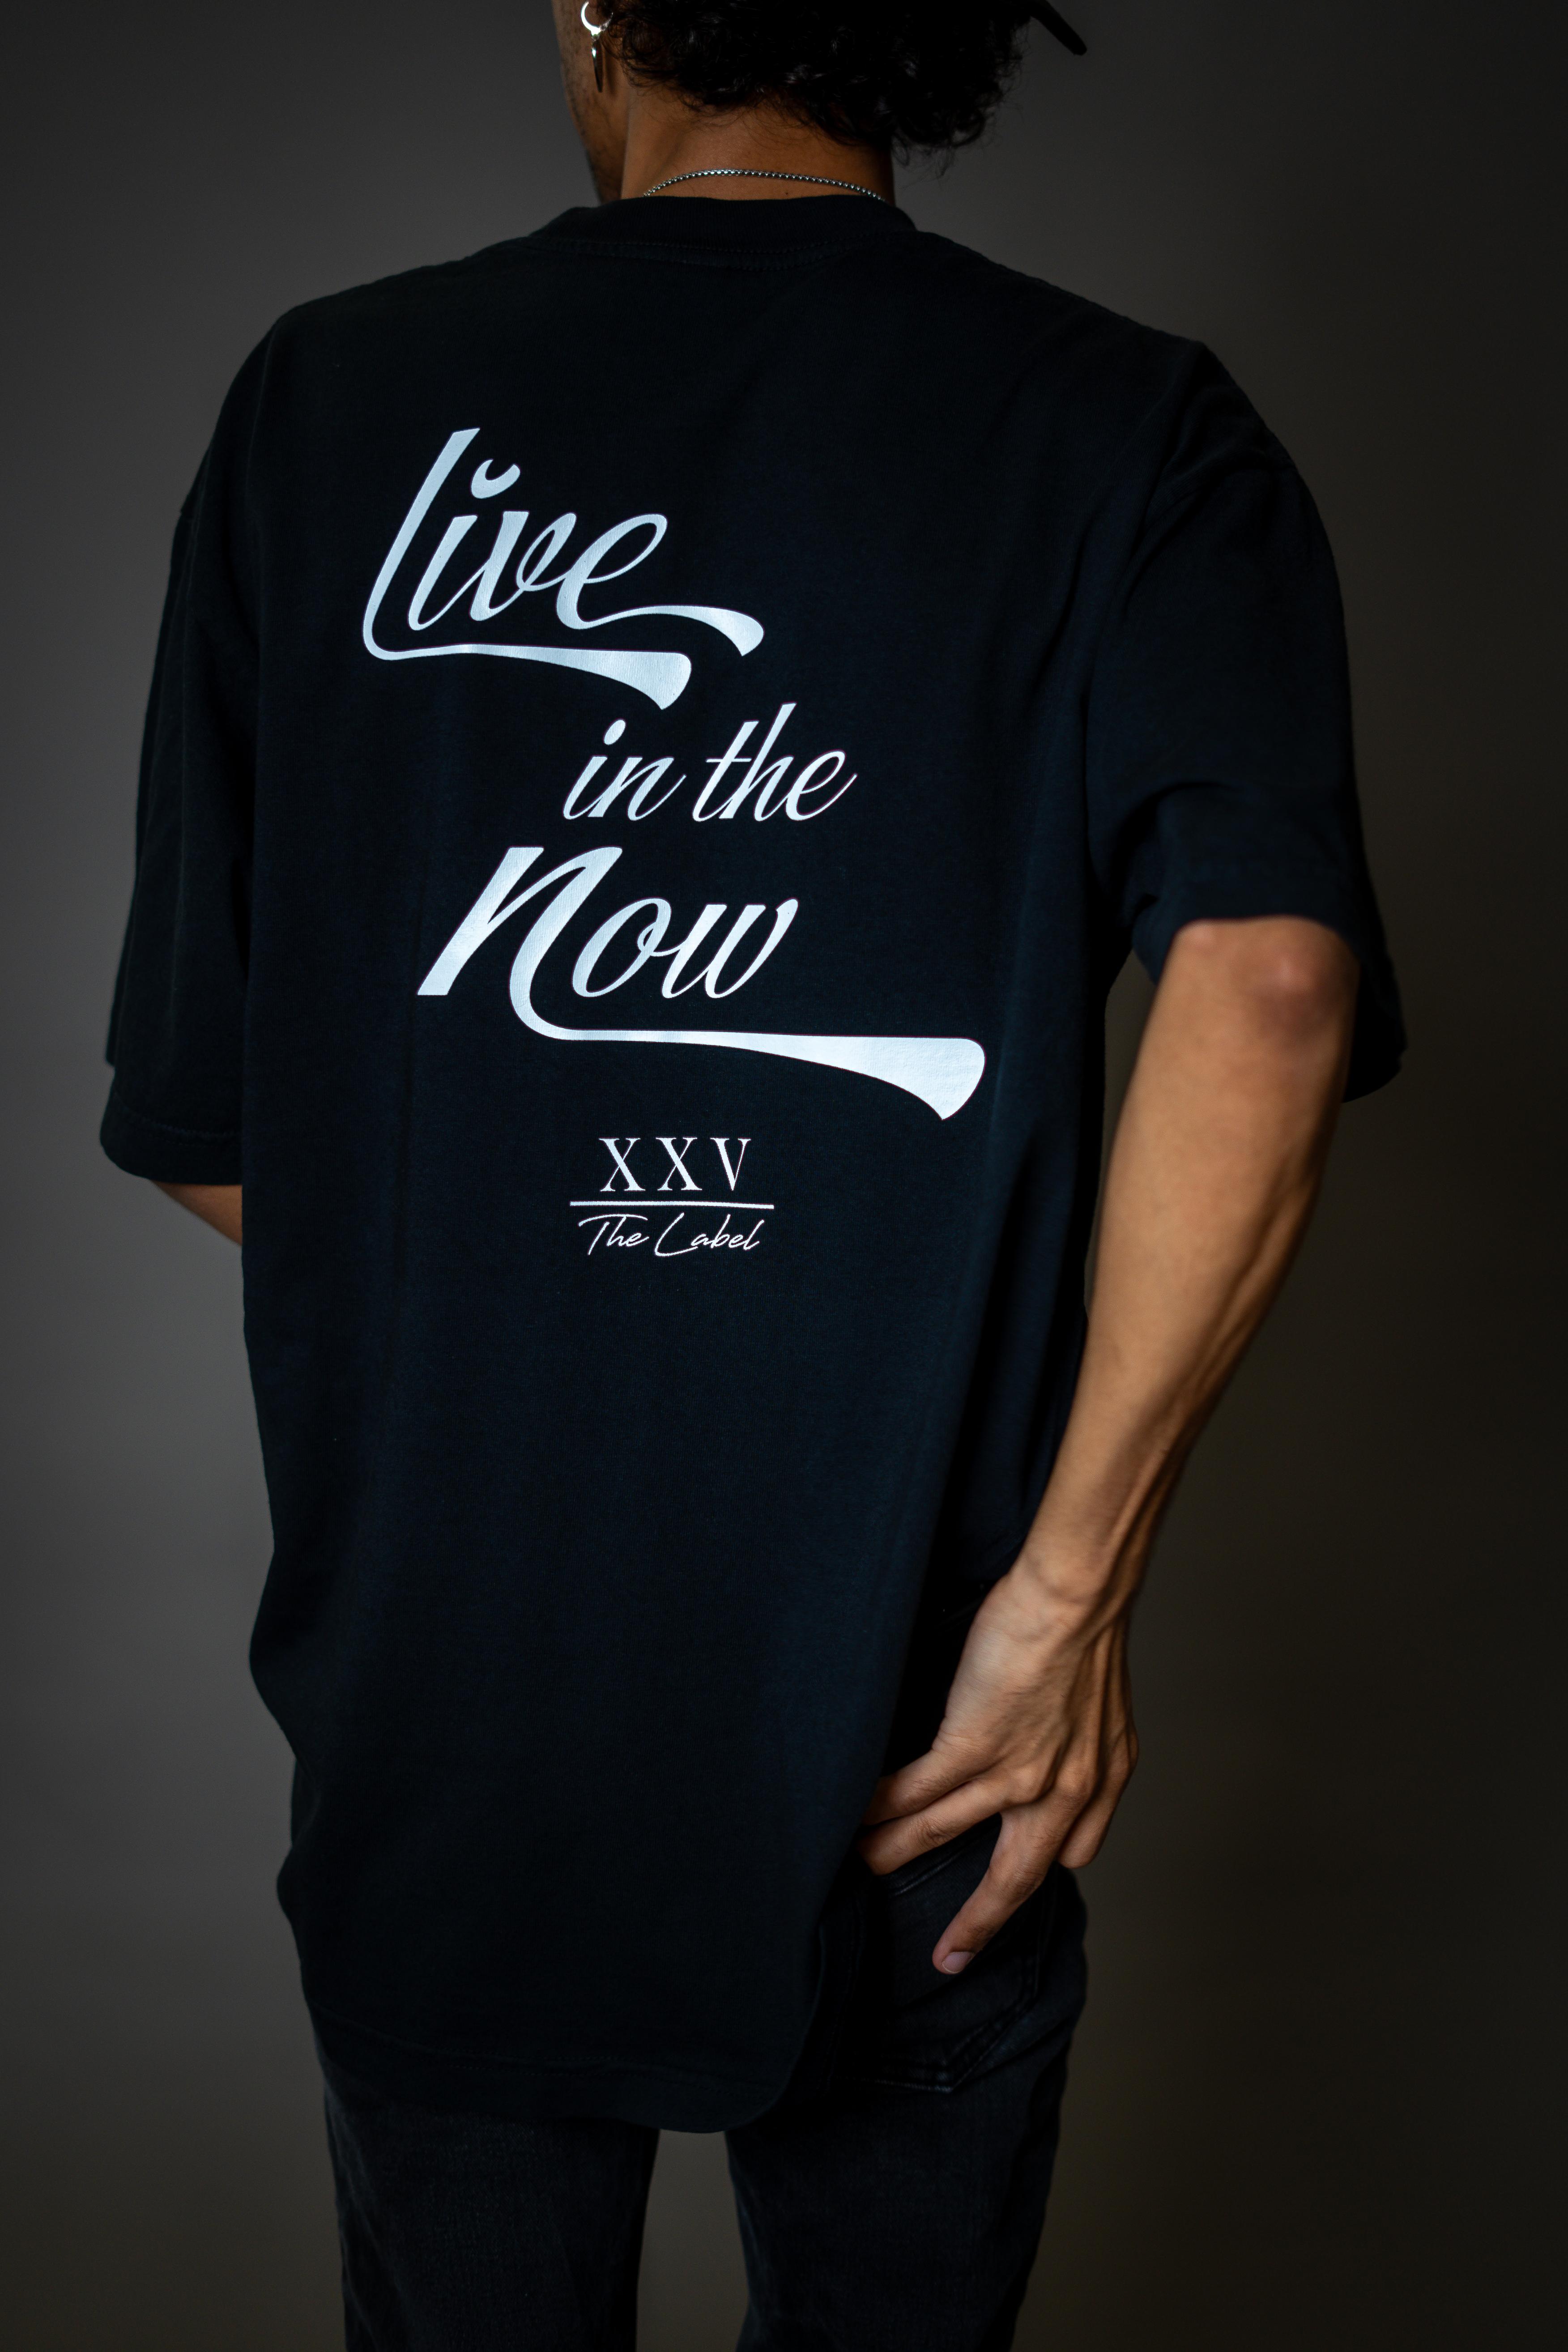 XXV Live in the Now